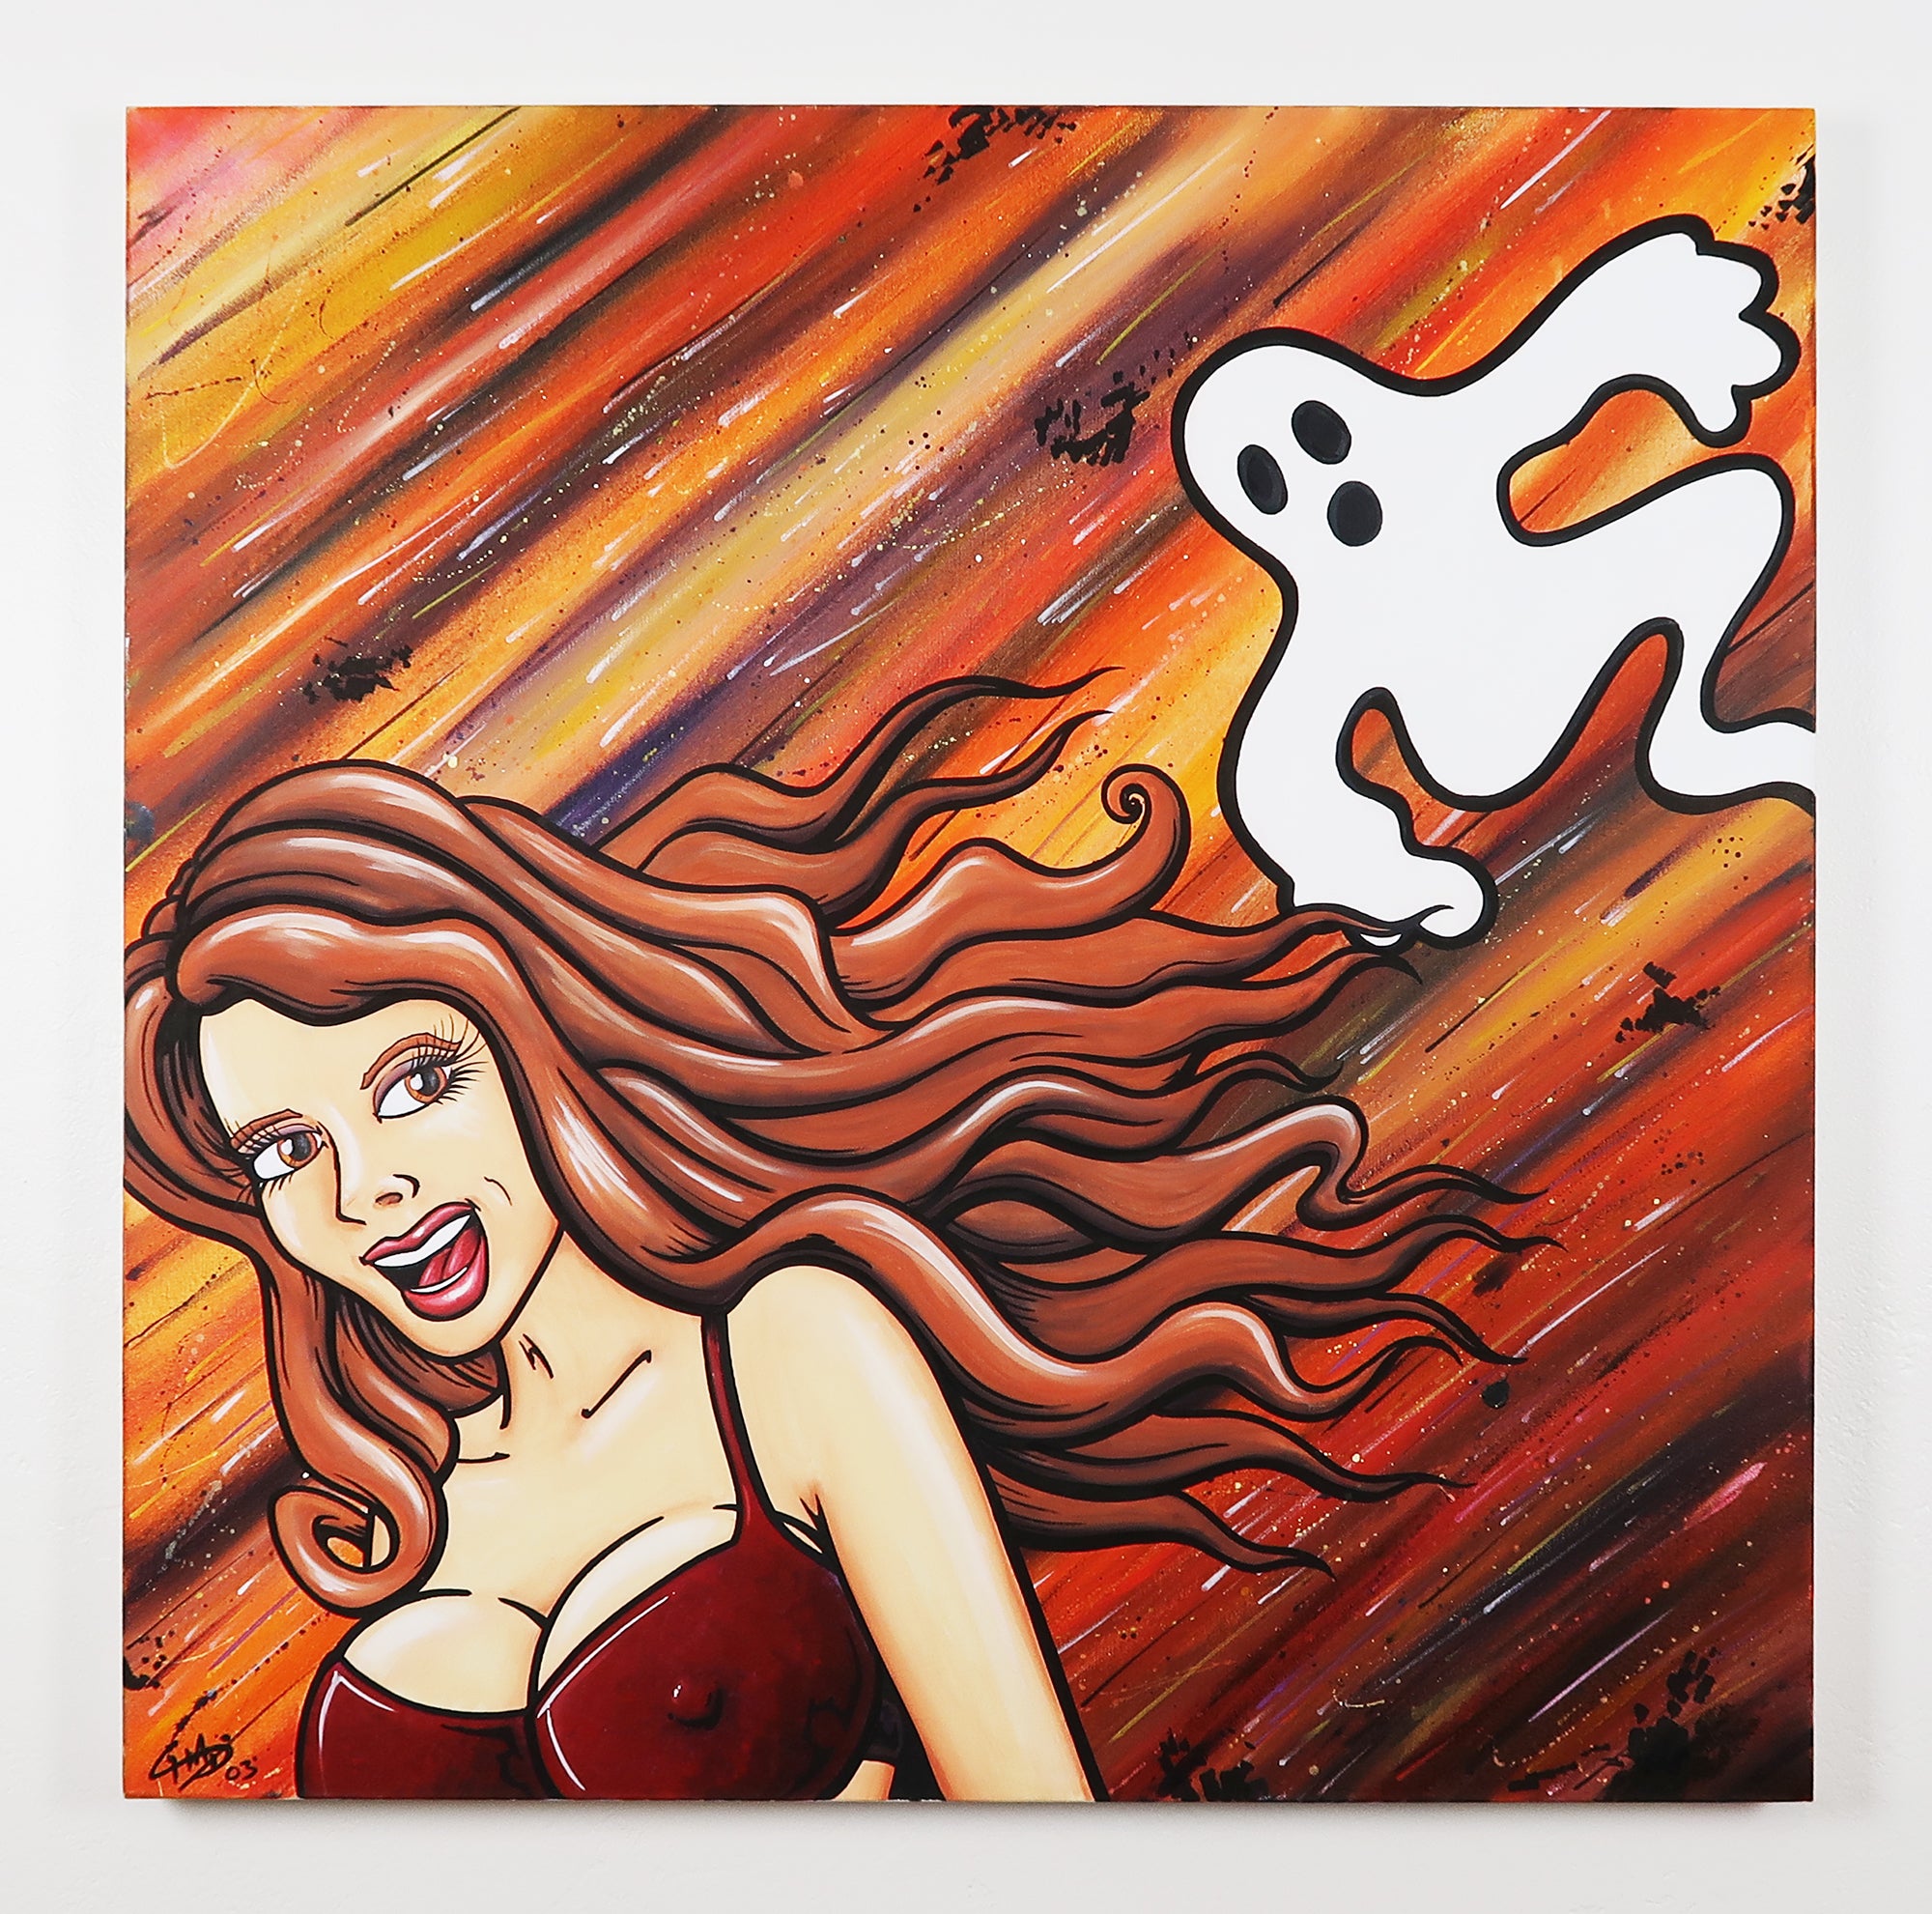 BOO! 36"x36" Canvas Painting